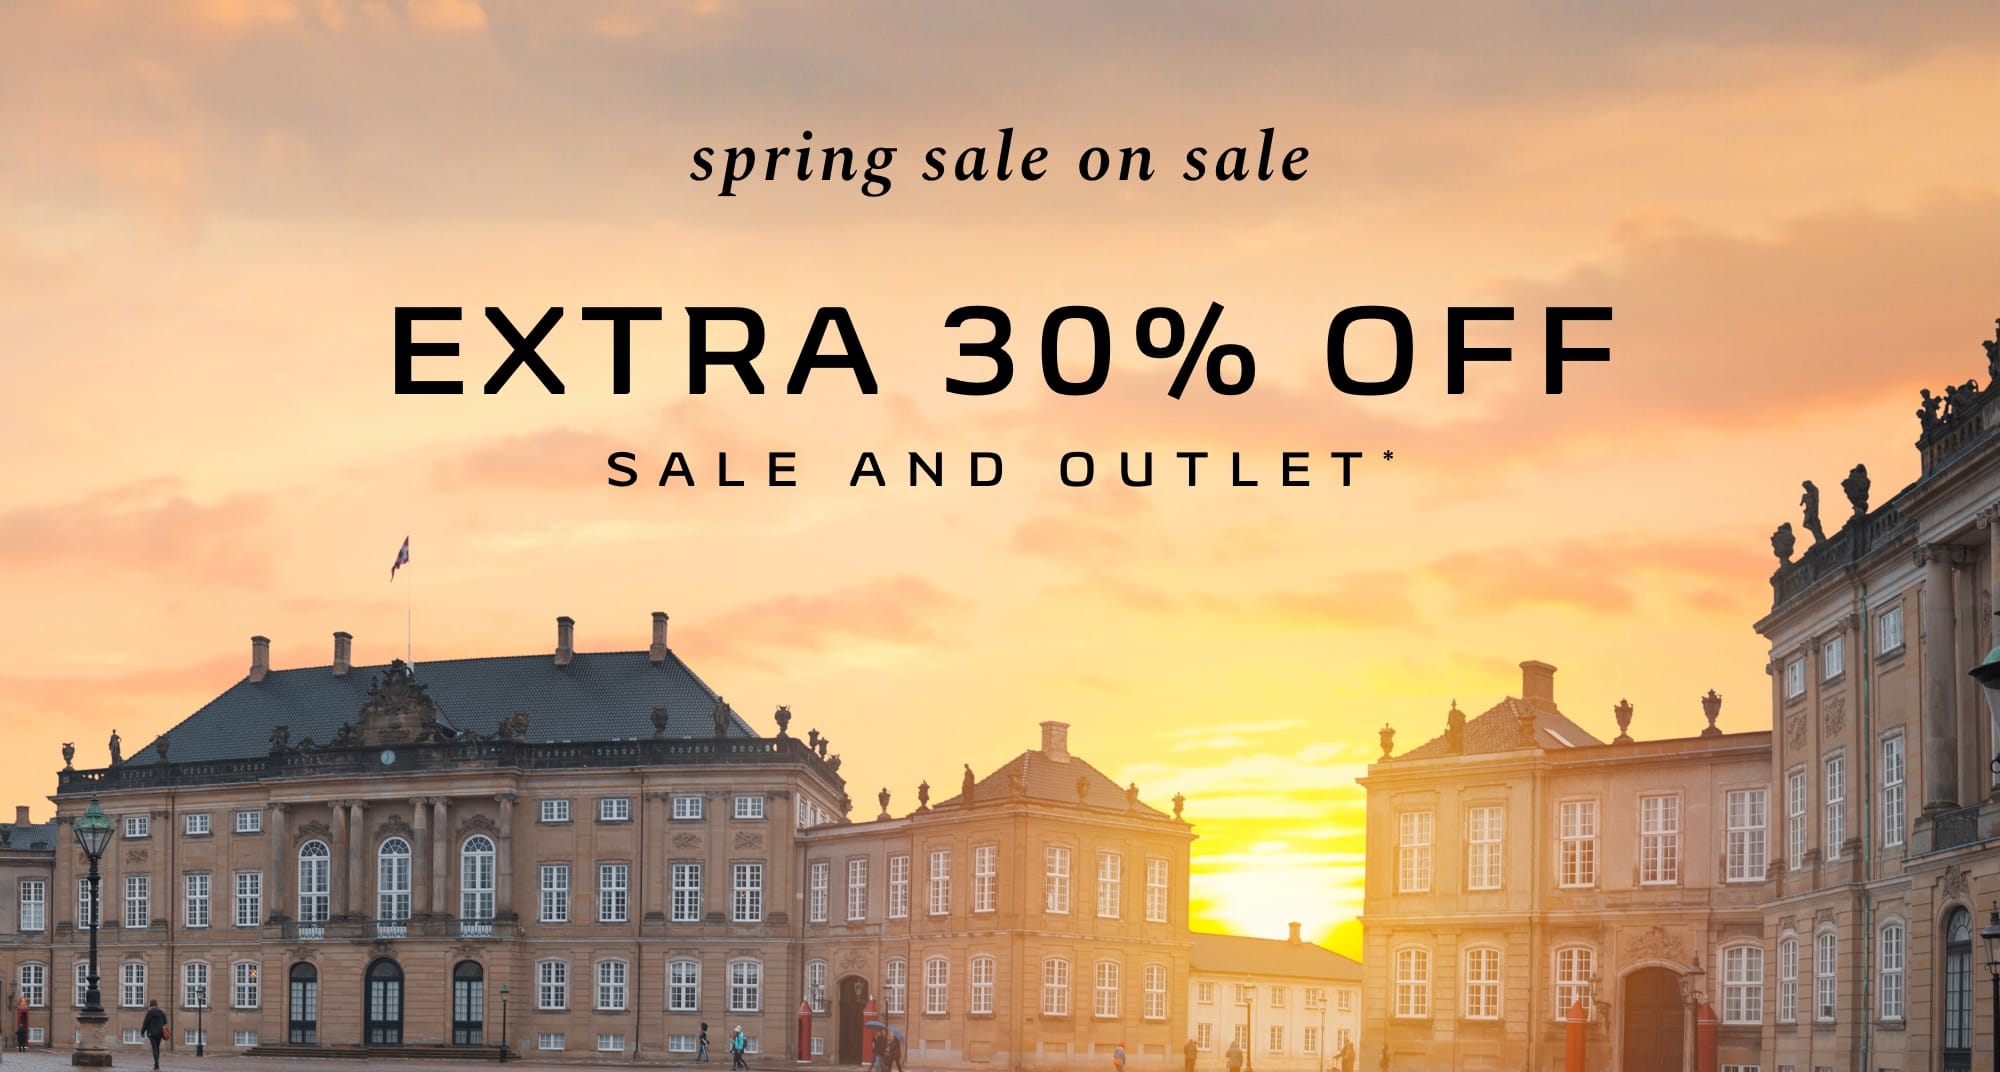 EXTRA 30% OFF SALE AND OUTLET*